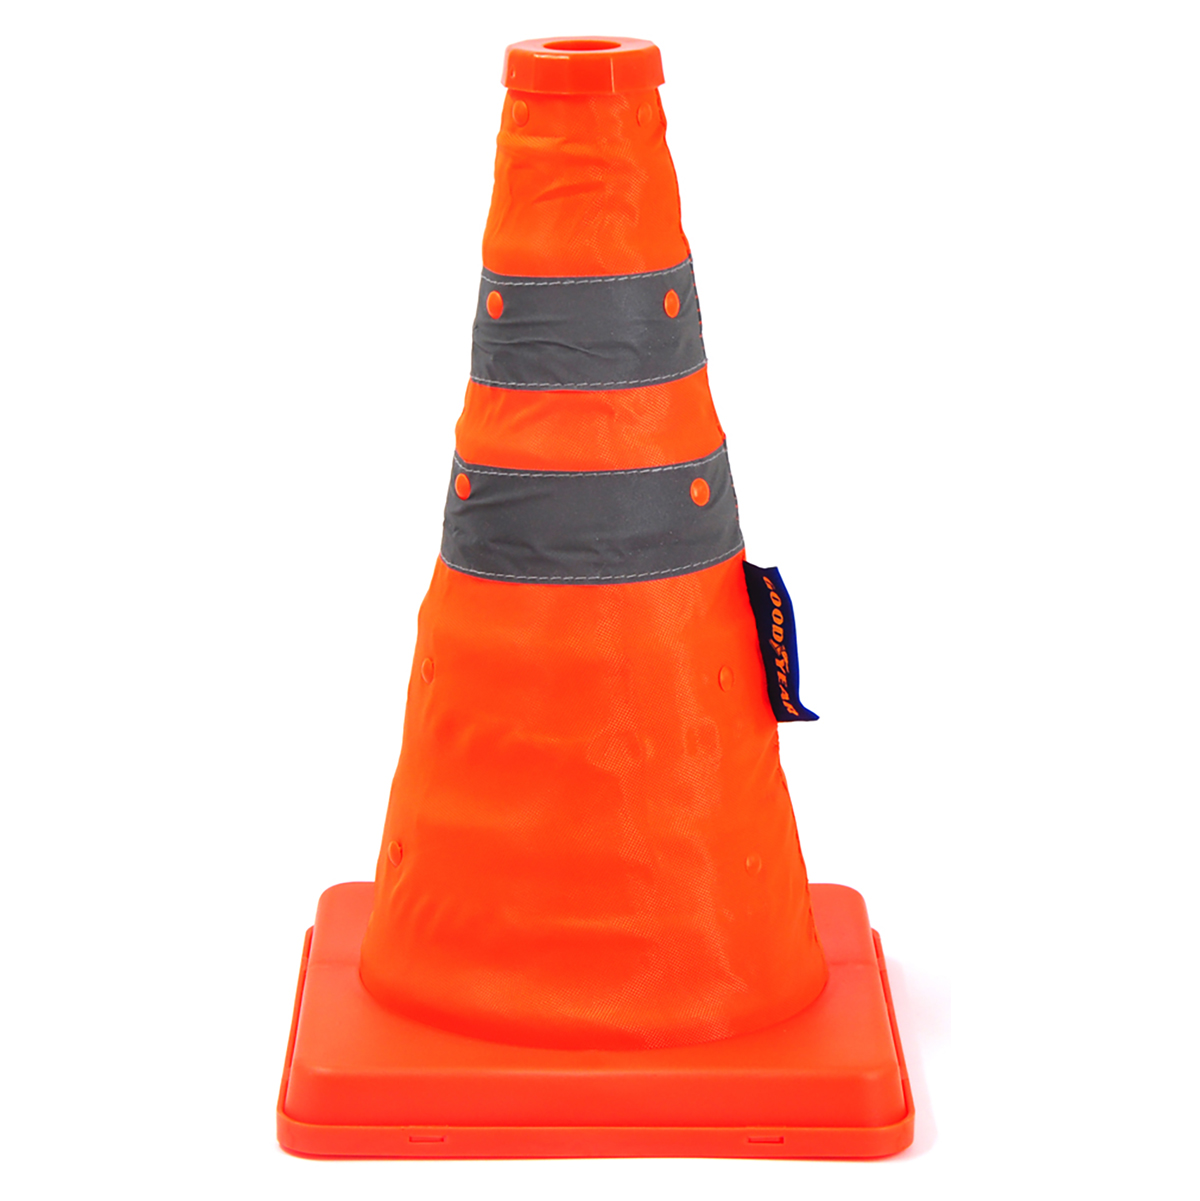 Goodyear 12-Inch Collapsible Pop Up Safety Cone GY3016 Traffic Pylon Multi Purpose Reflective Safety Cone Orange Cone for Parkin